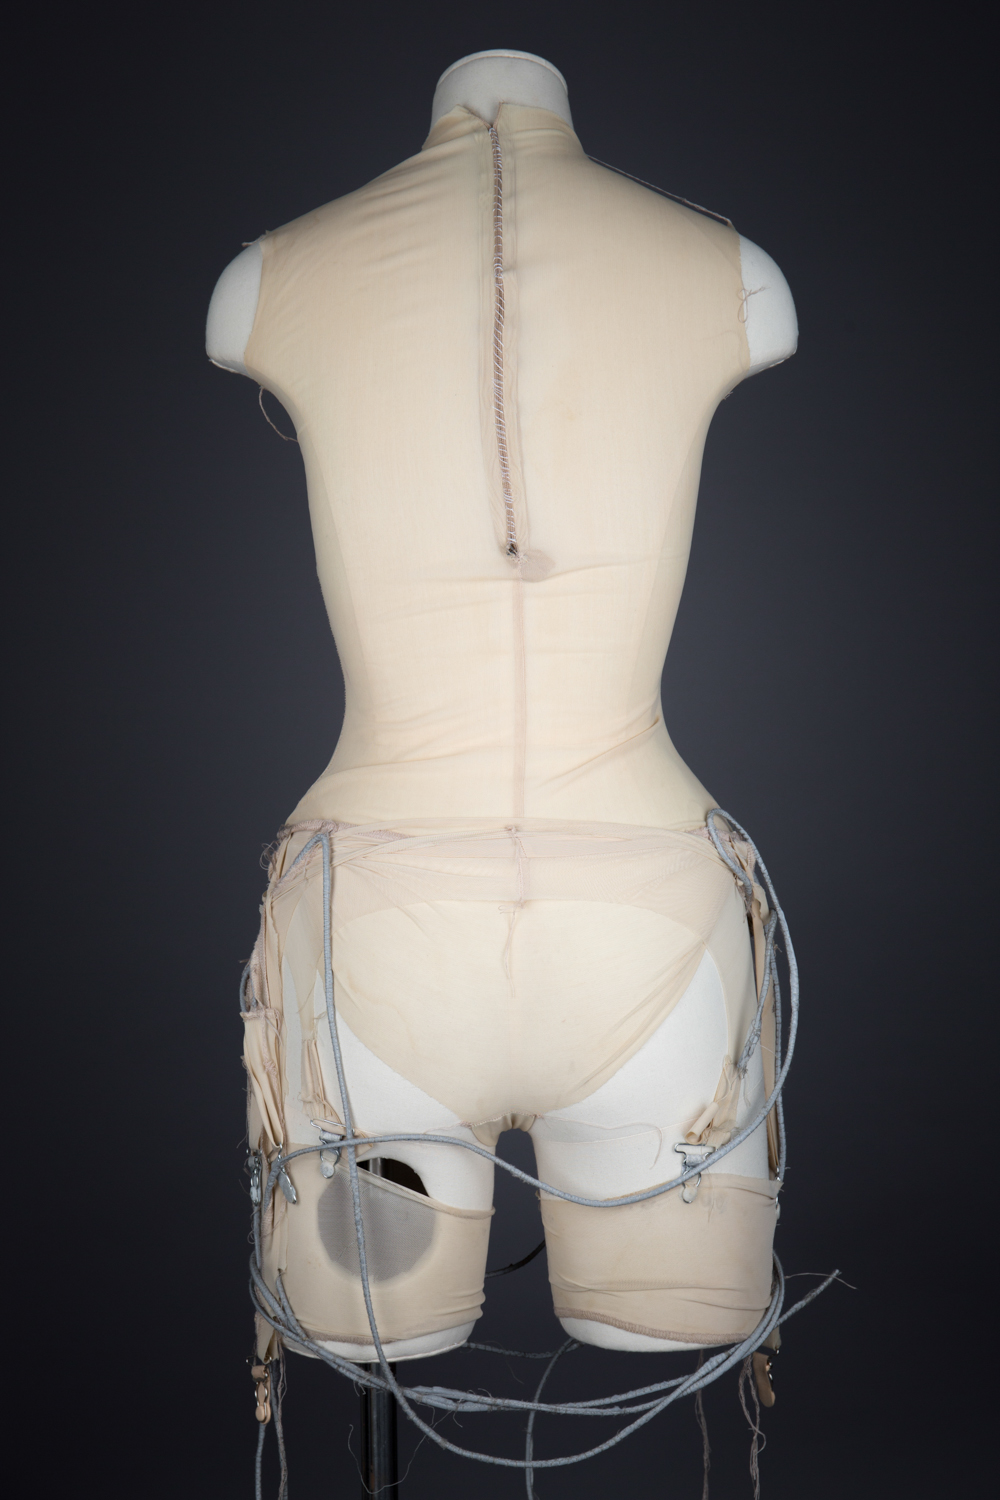 Bandage Mesh Reflective Bodysuit by Rachel Freire, 2010, UK. The Underpinnings Museum. Photography by Tigz Rice.